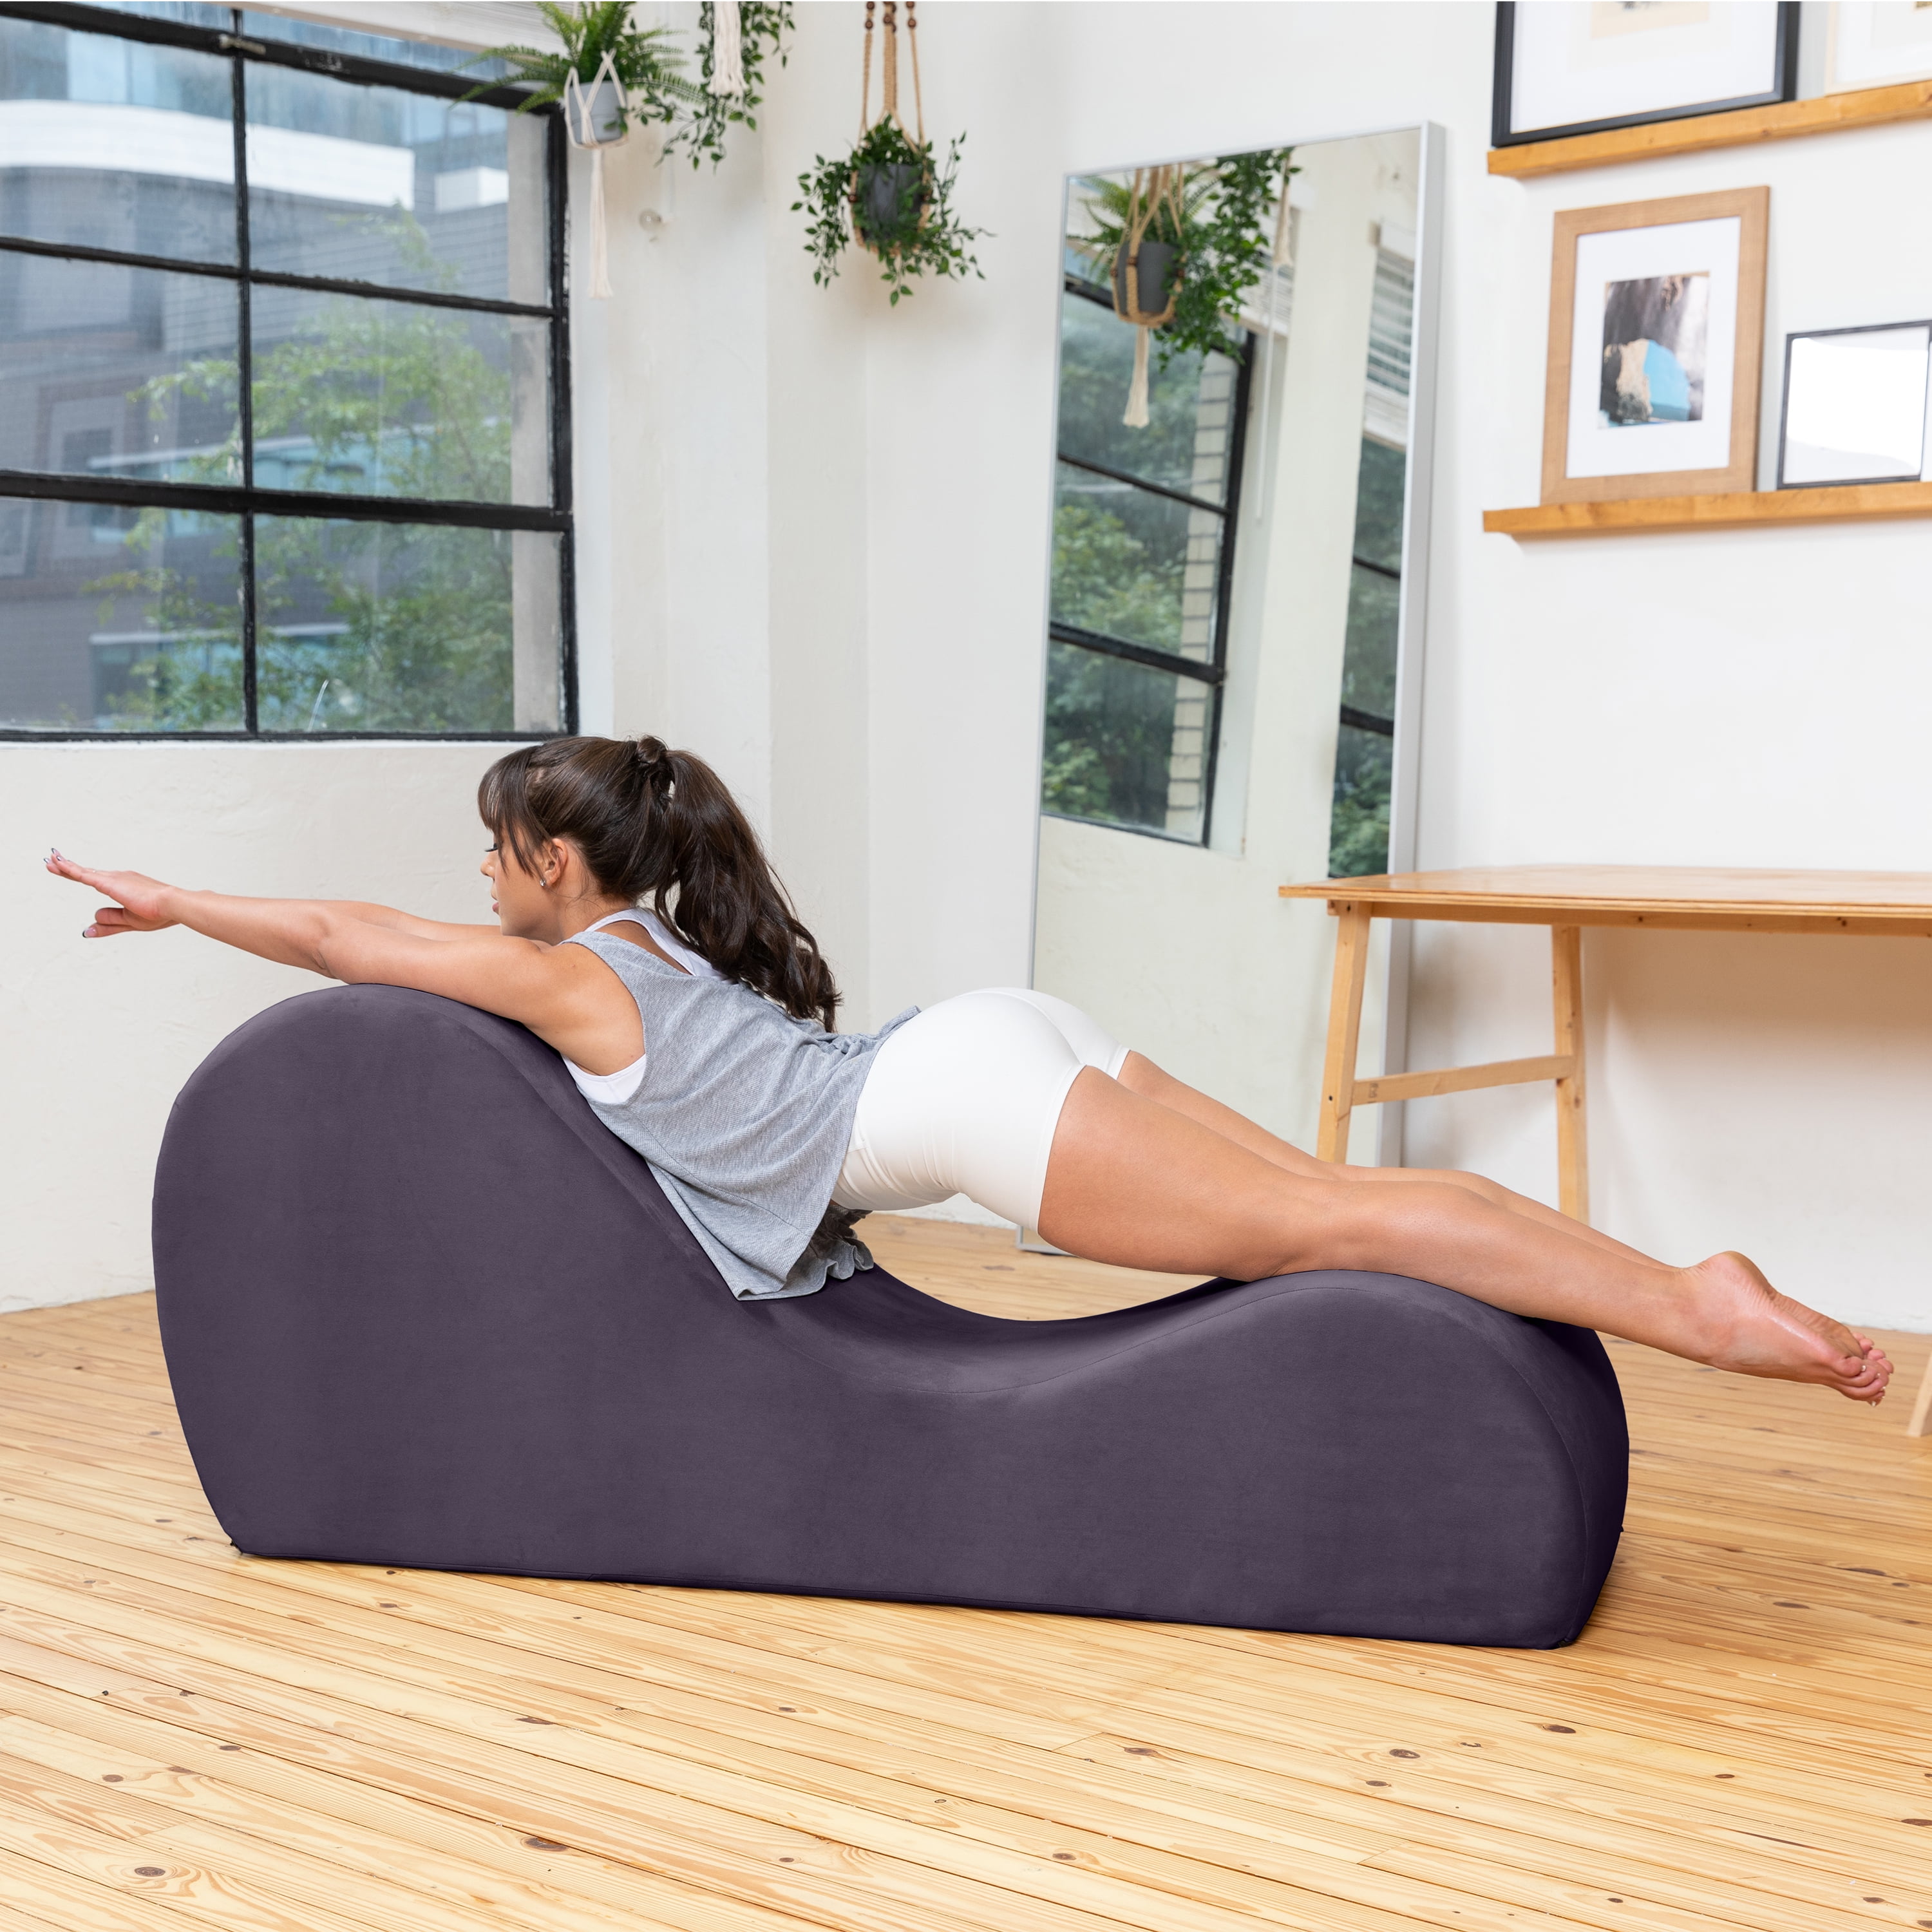 Best of Yoga chair for sex